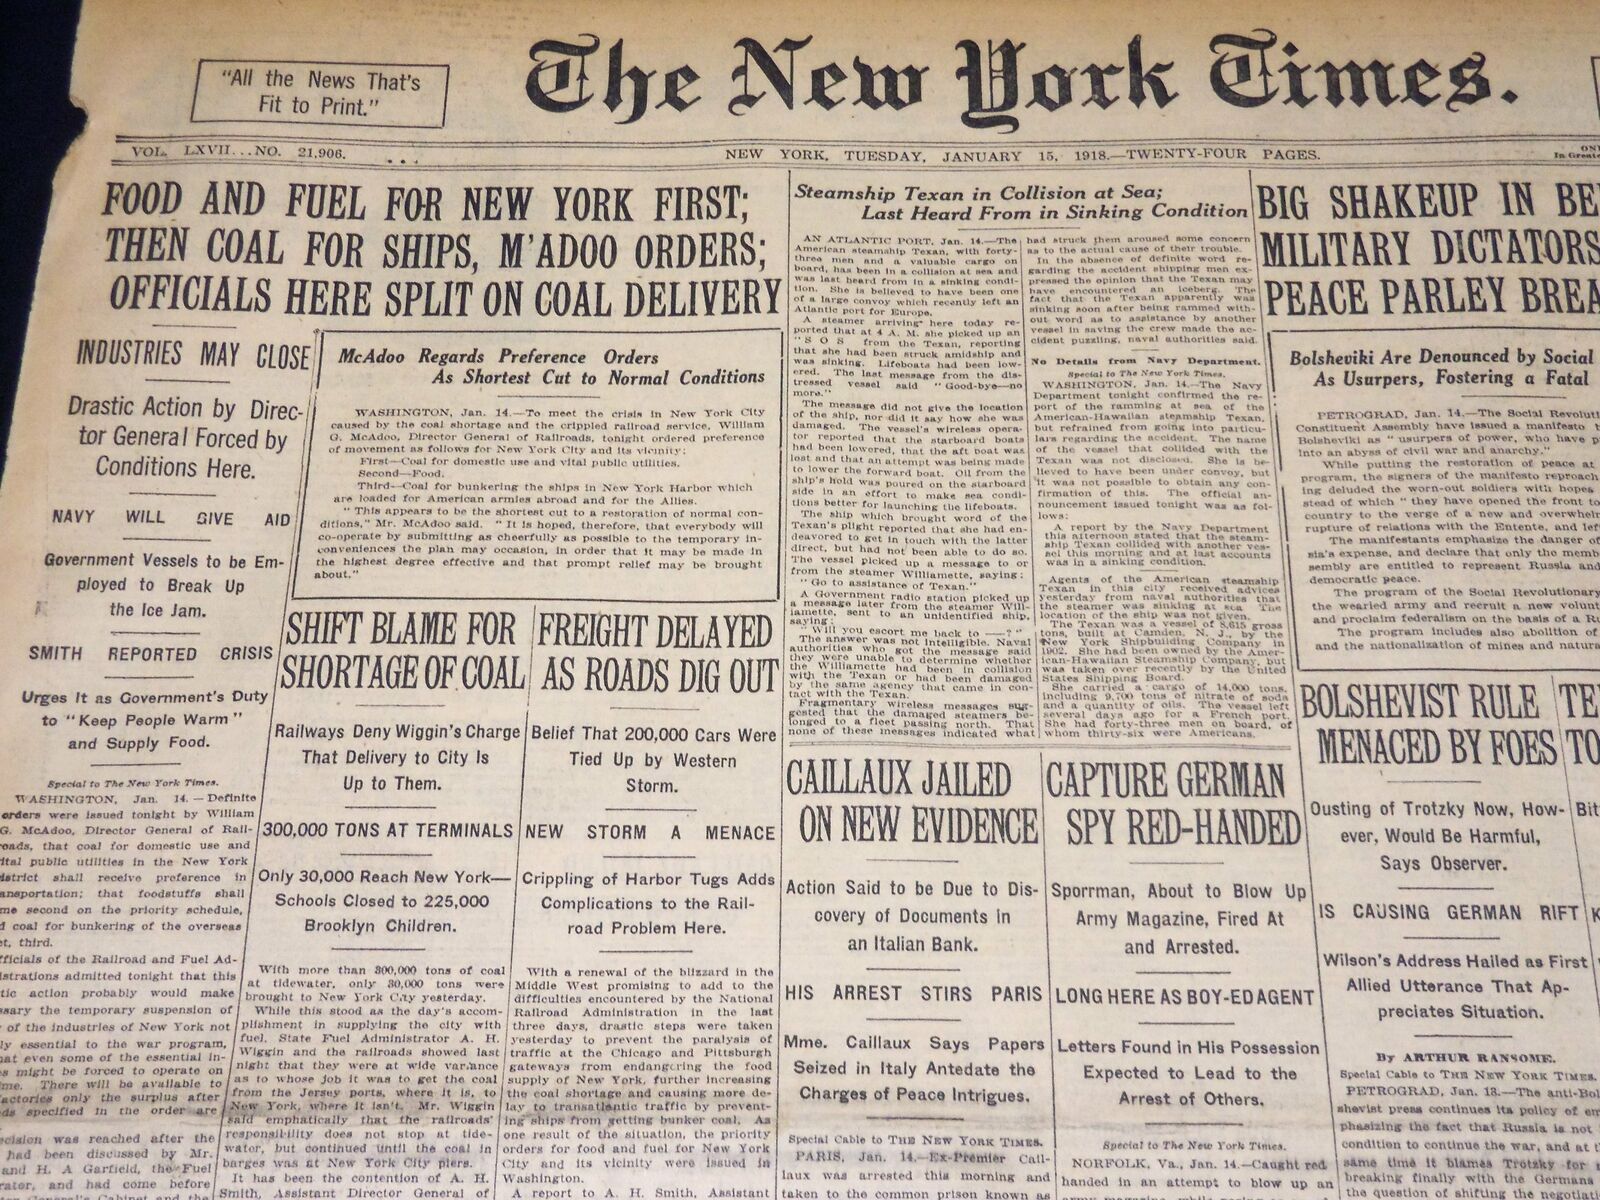 1918 JANUARY 15 NEW YORK TIMES - FOOD AND FUEL FOR NEW YORK FIRST - NT 7924